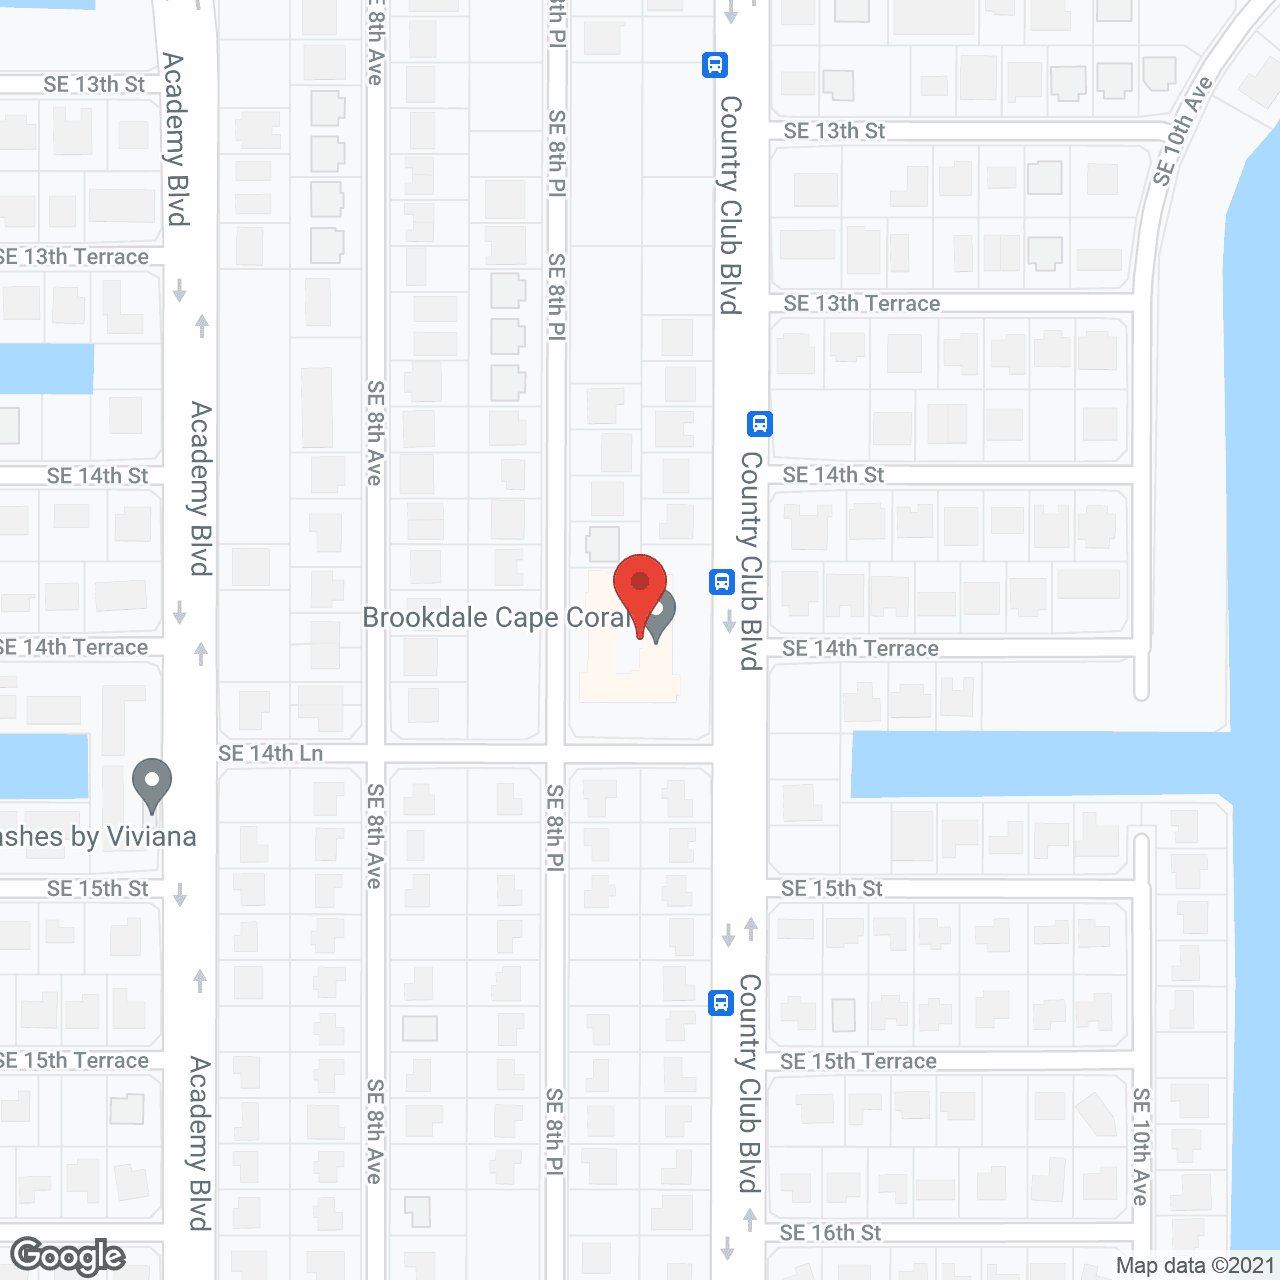 Brookdale Cape Coral in google map